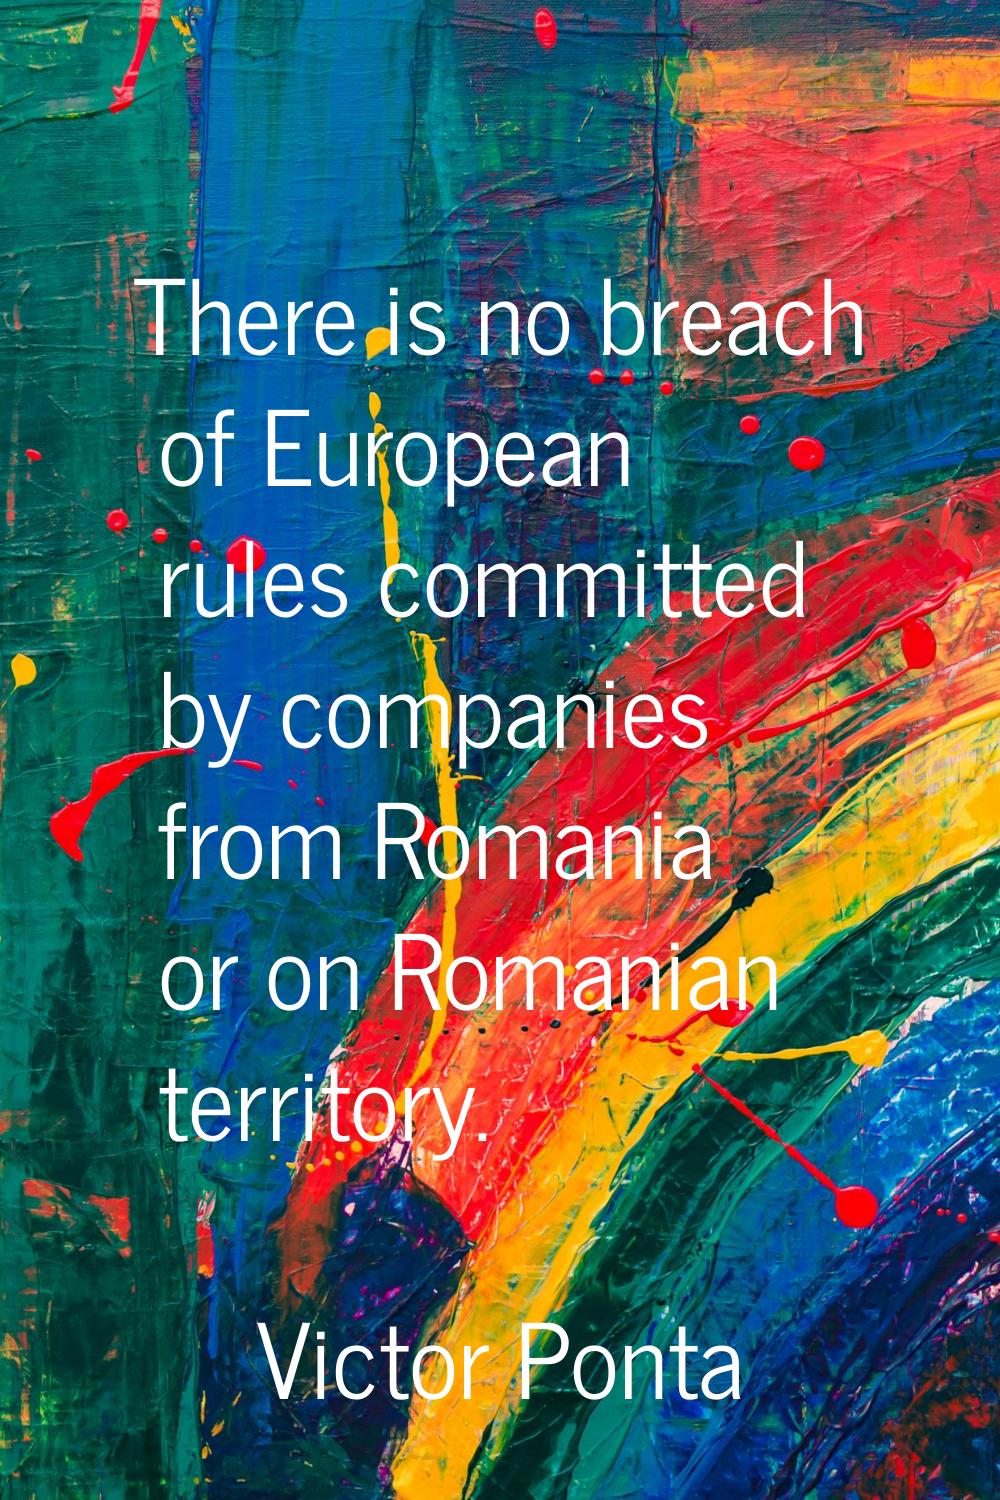 There is no breach of European rules committed by companies from Romania or on Romanian territory.